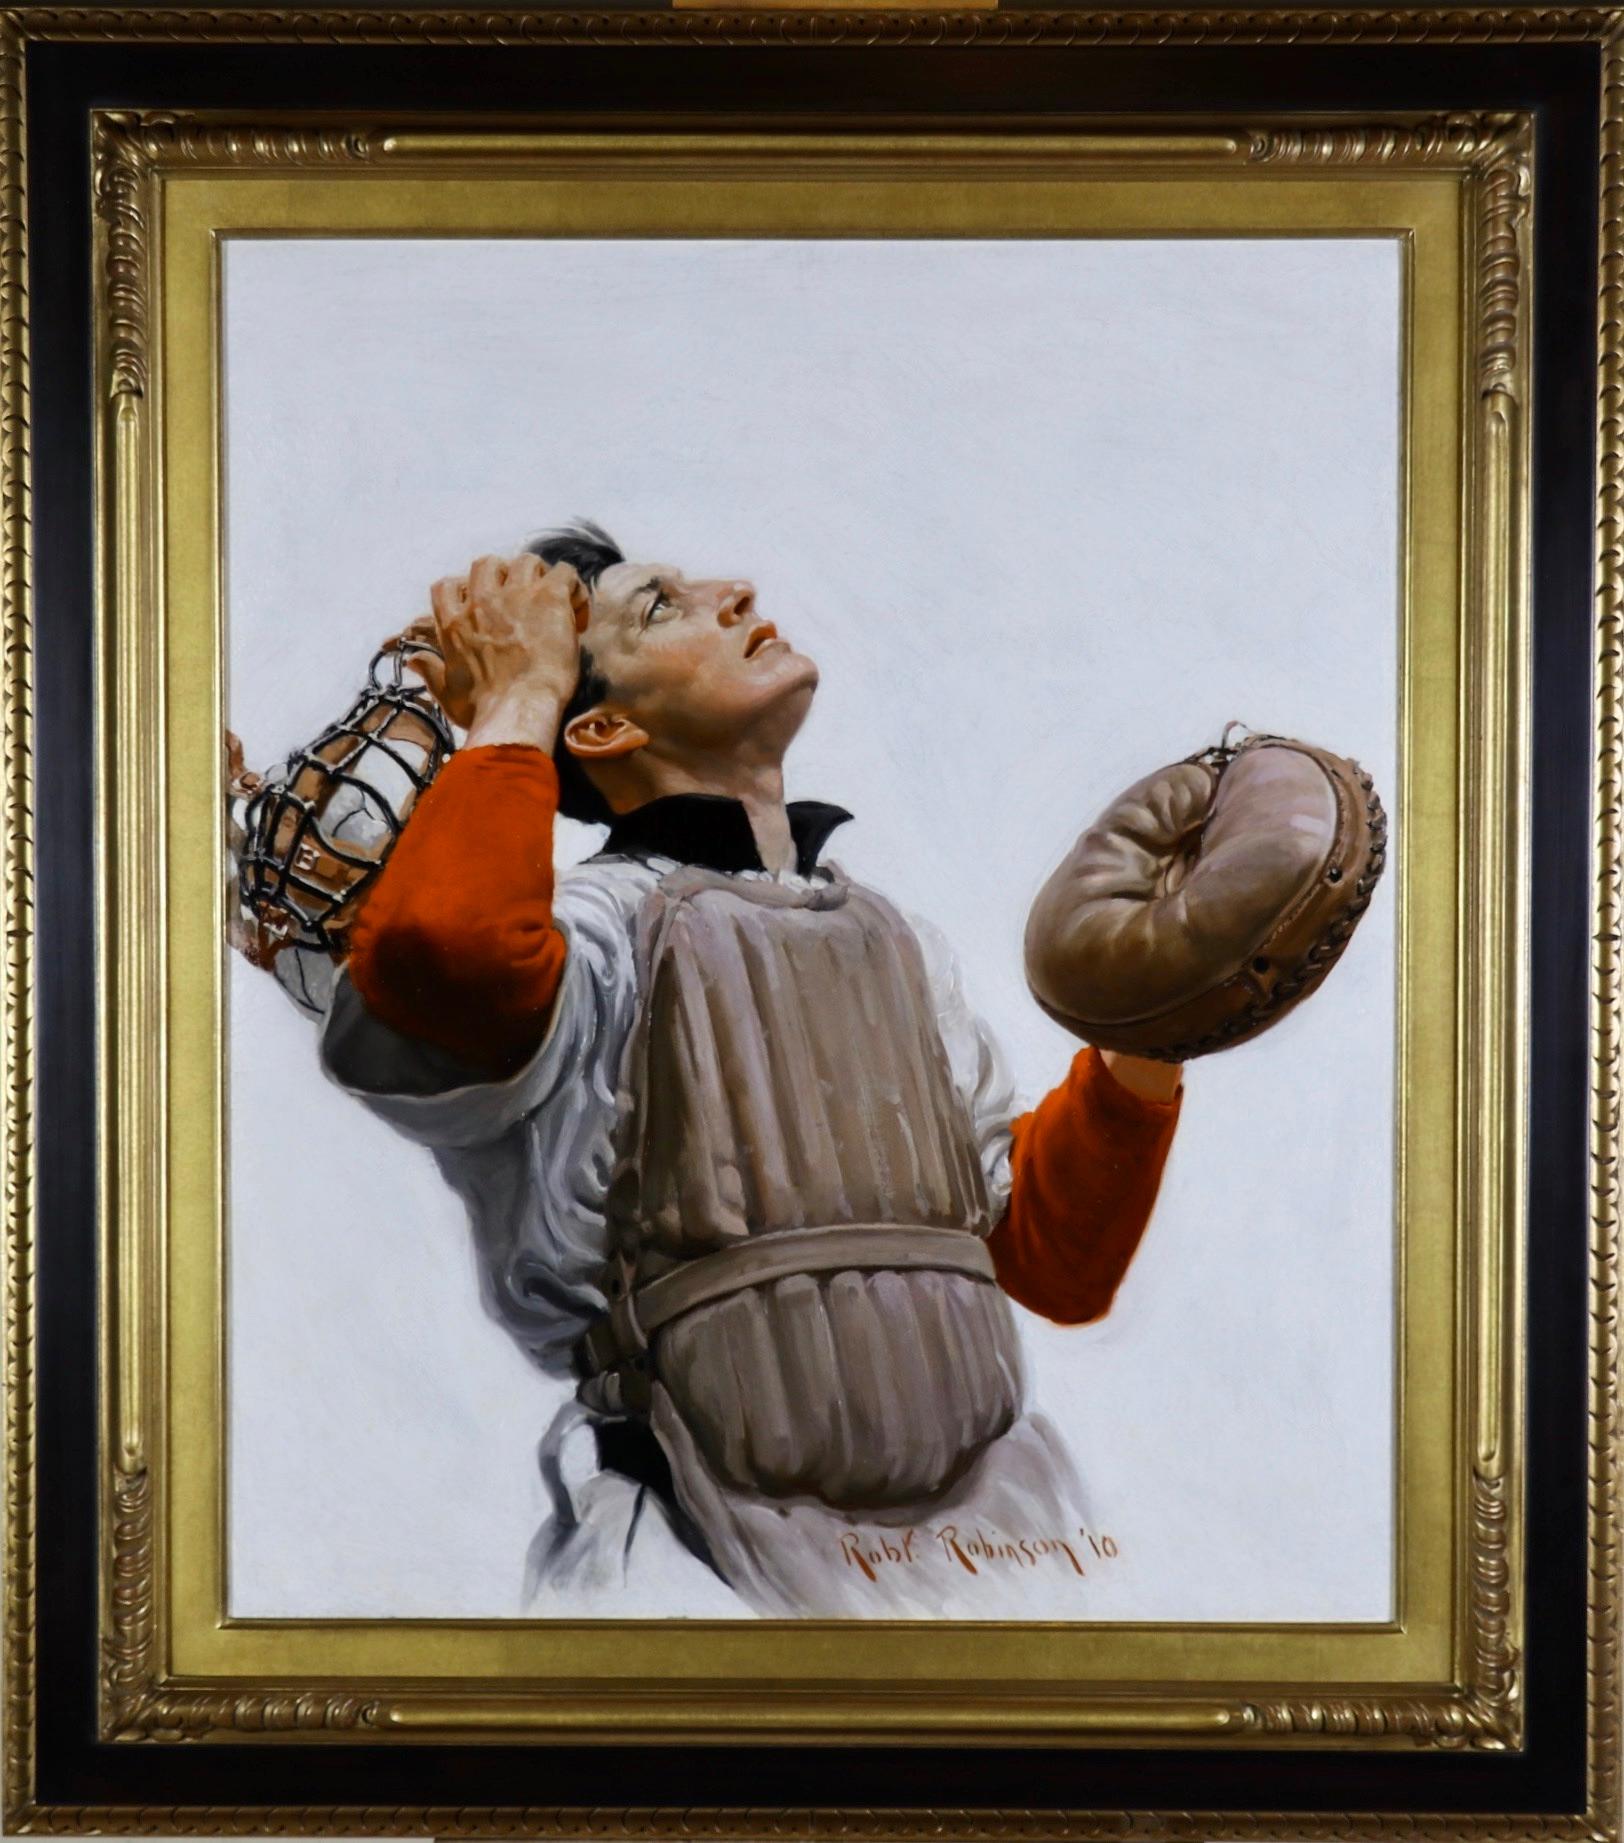 Baseball Catcher, Post Cover - Painting by Robert Robinson